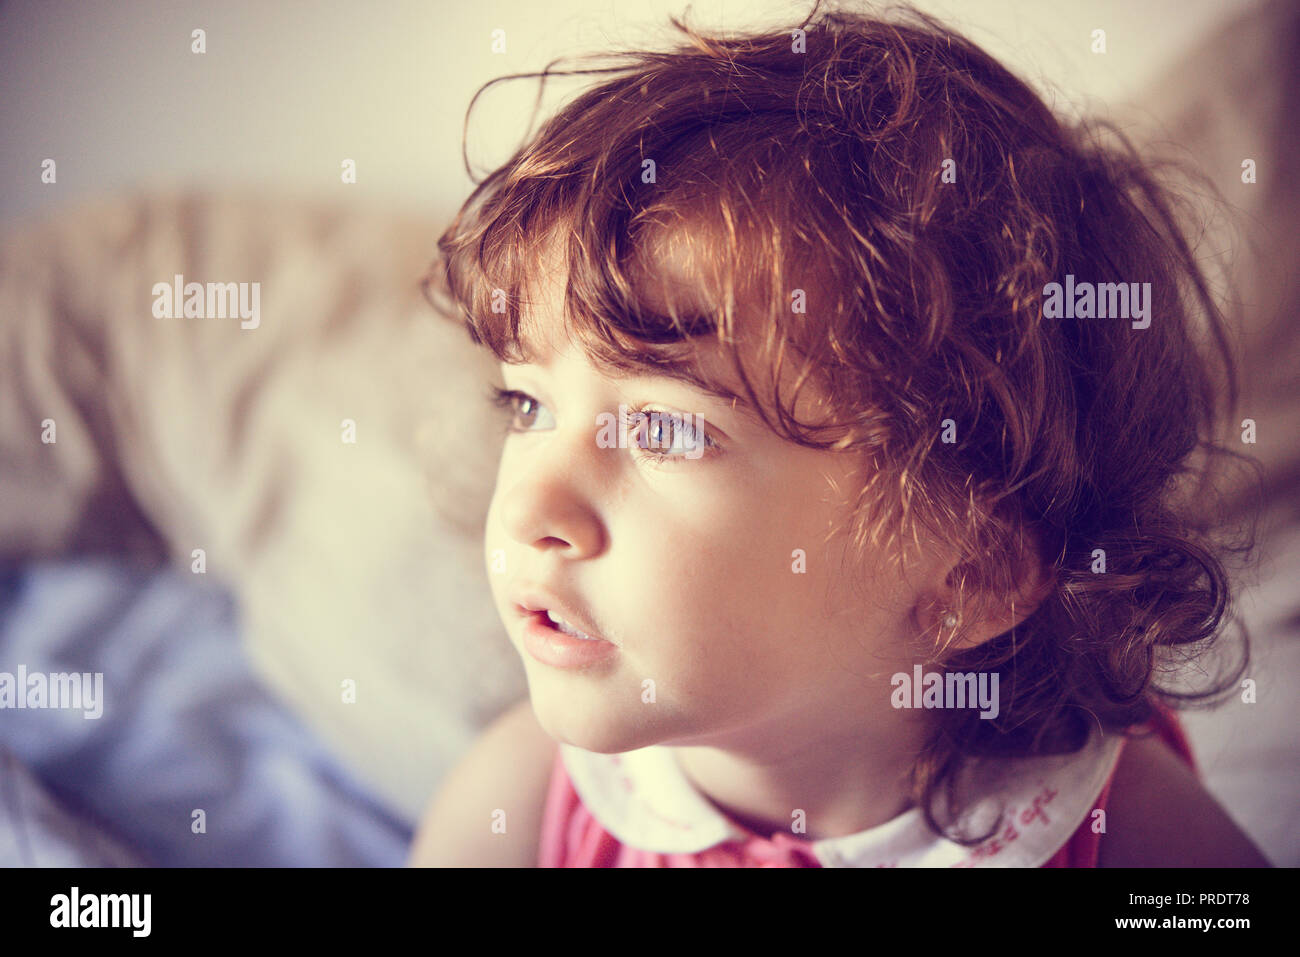 Adorable little girl with curly hair tousled at home Stock Photo